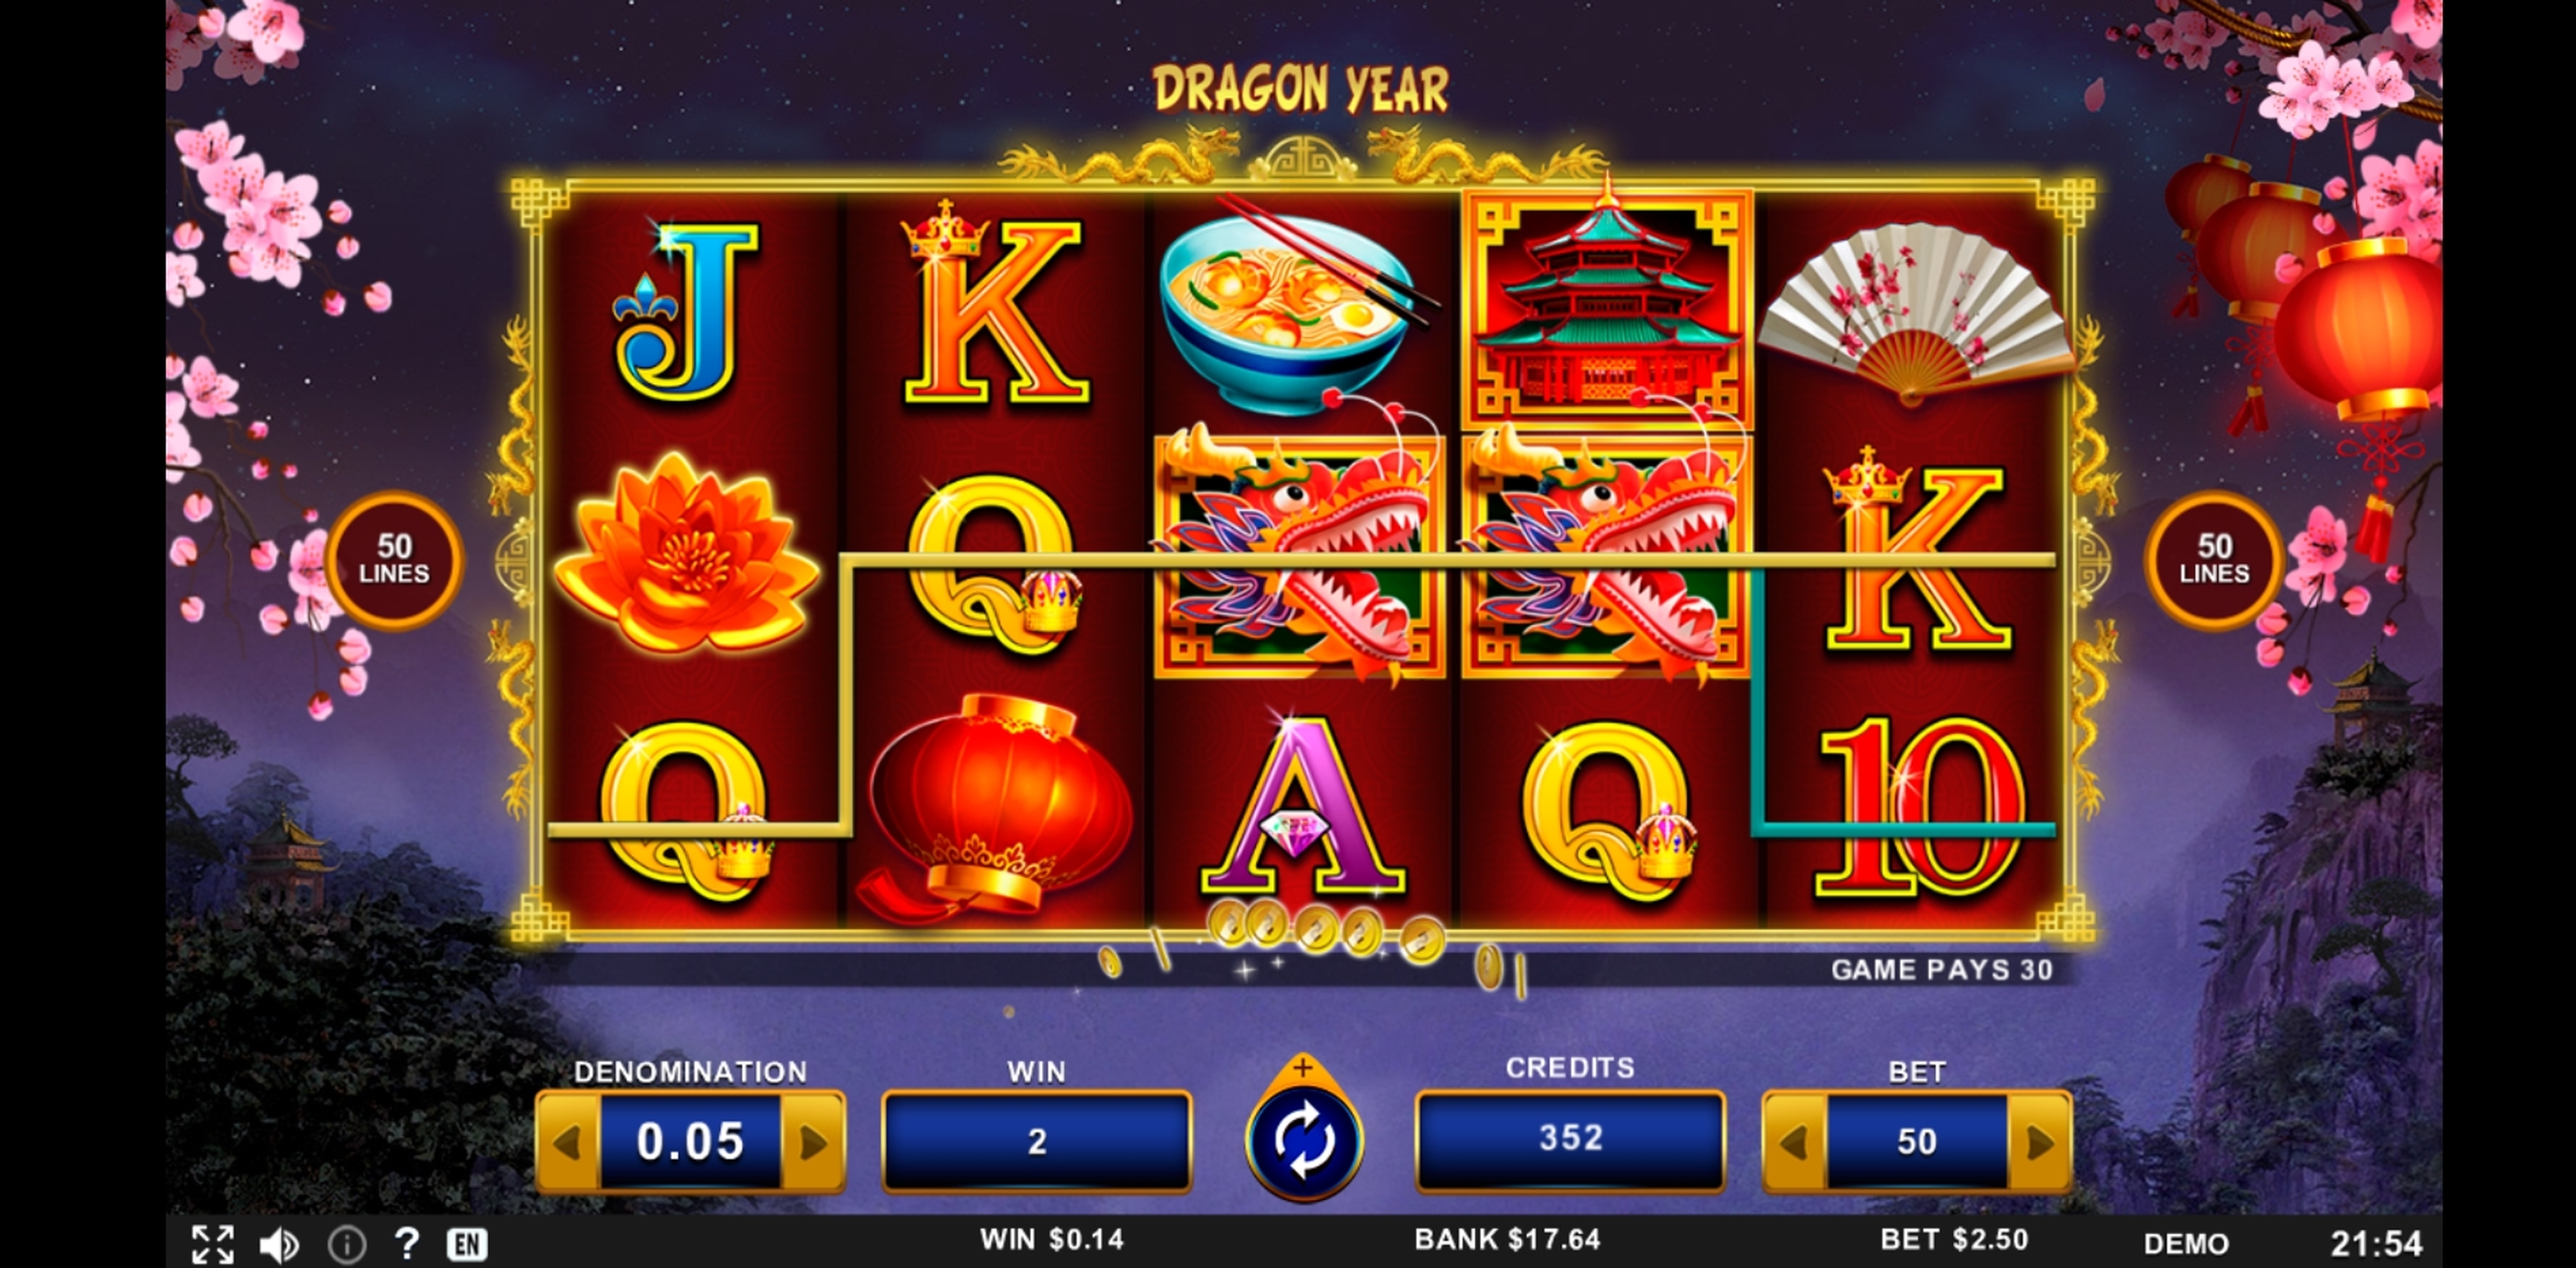 Win Money in Dragon Year Free Slot Game by Zitro